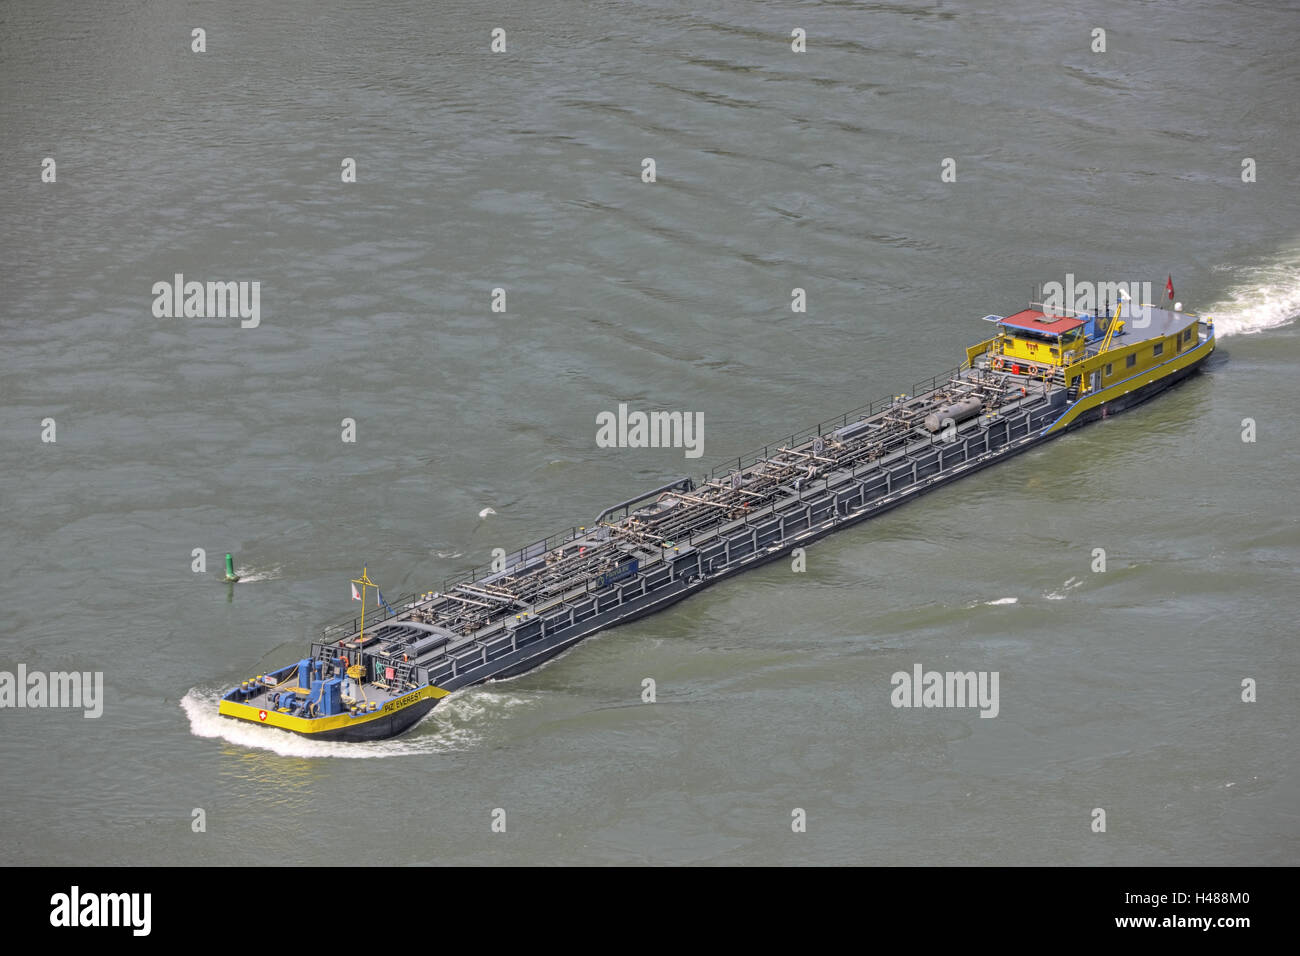 The Rhine, freighter, Stock Photo